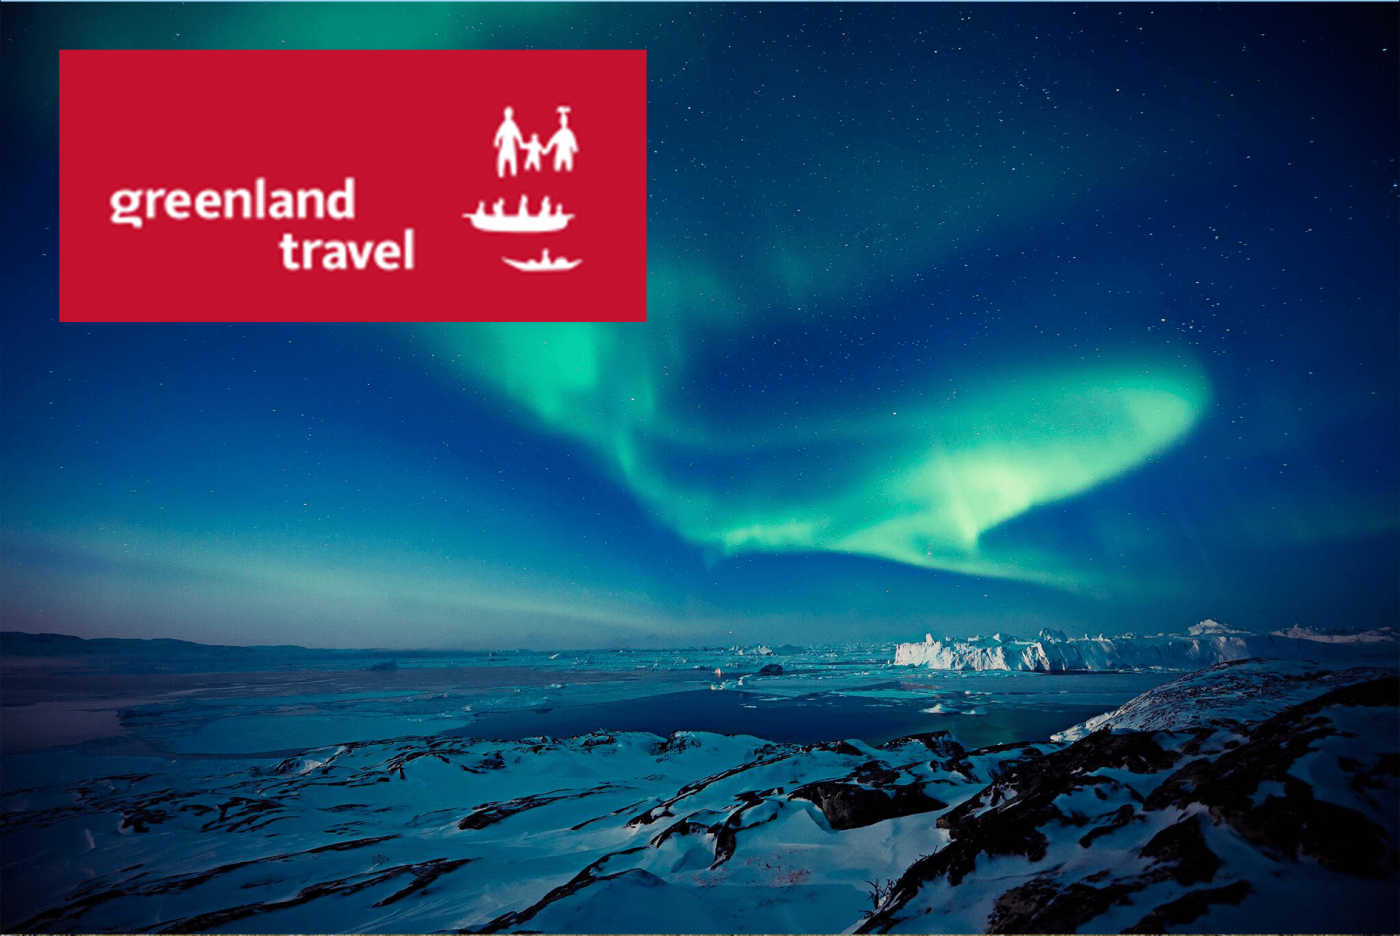 Greenland Travel: Northern Lights on the Starboard Side